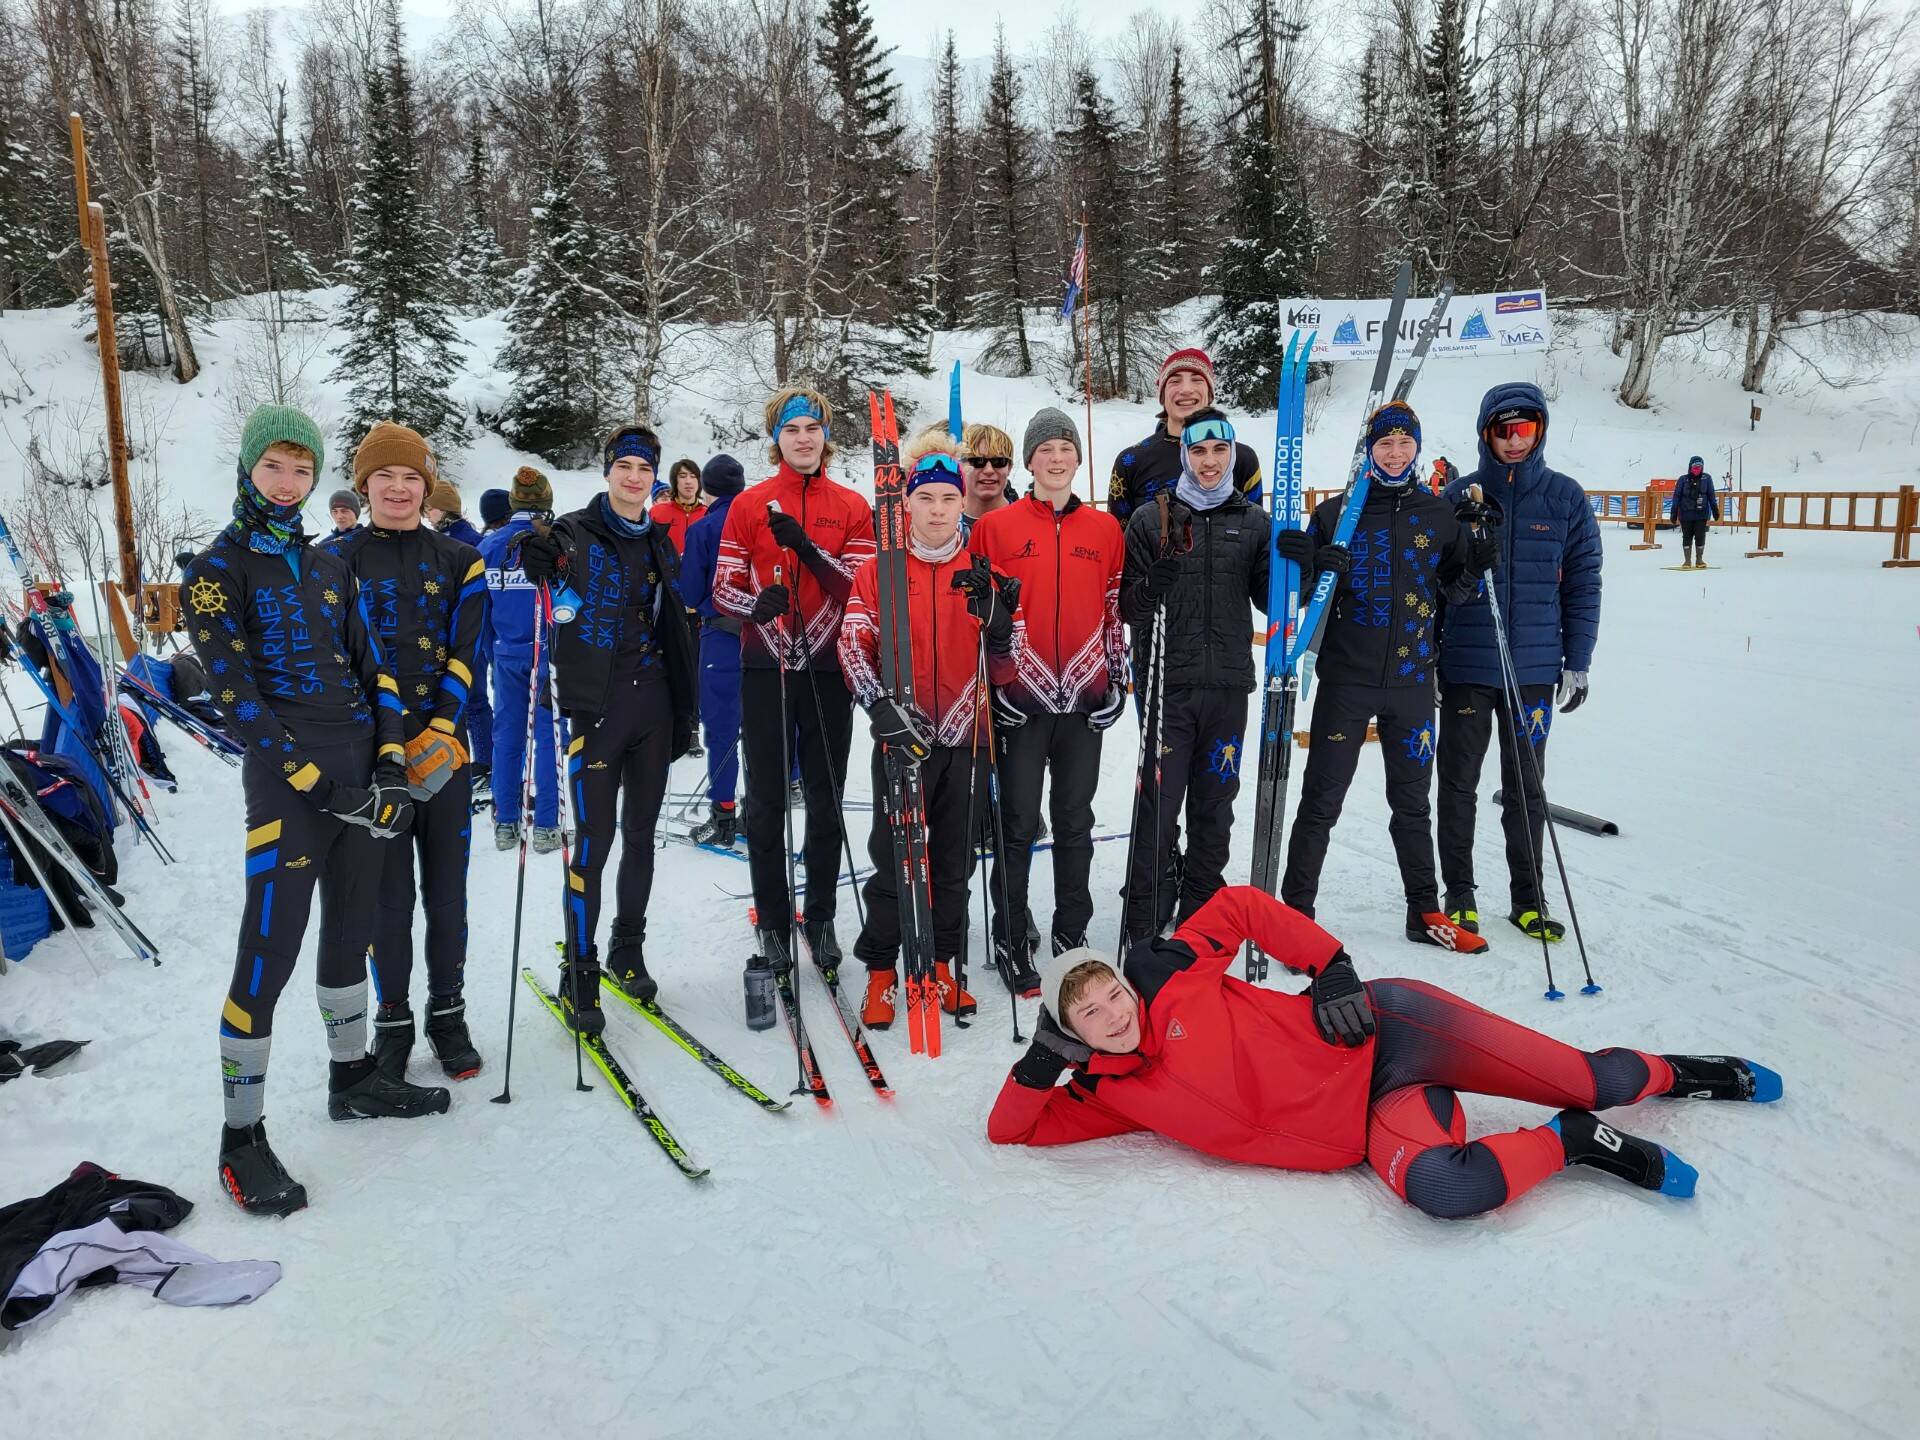 Skiers representing Homer, Kenai and Soldotna cross-country teams pose during the Region 3 cross-country ski meet on Saturday, at the Government Peak Recreation Area in the Matanuska-Susitna valleys. The Homer Mariner XC ski team did well, coach Jessie Goodrich said, noting that when the skiers head to the state competition they have “the potential to be the winning team.”